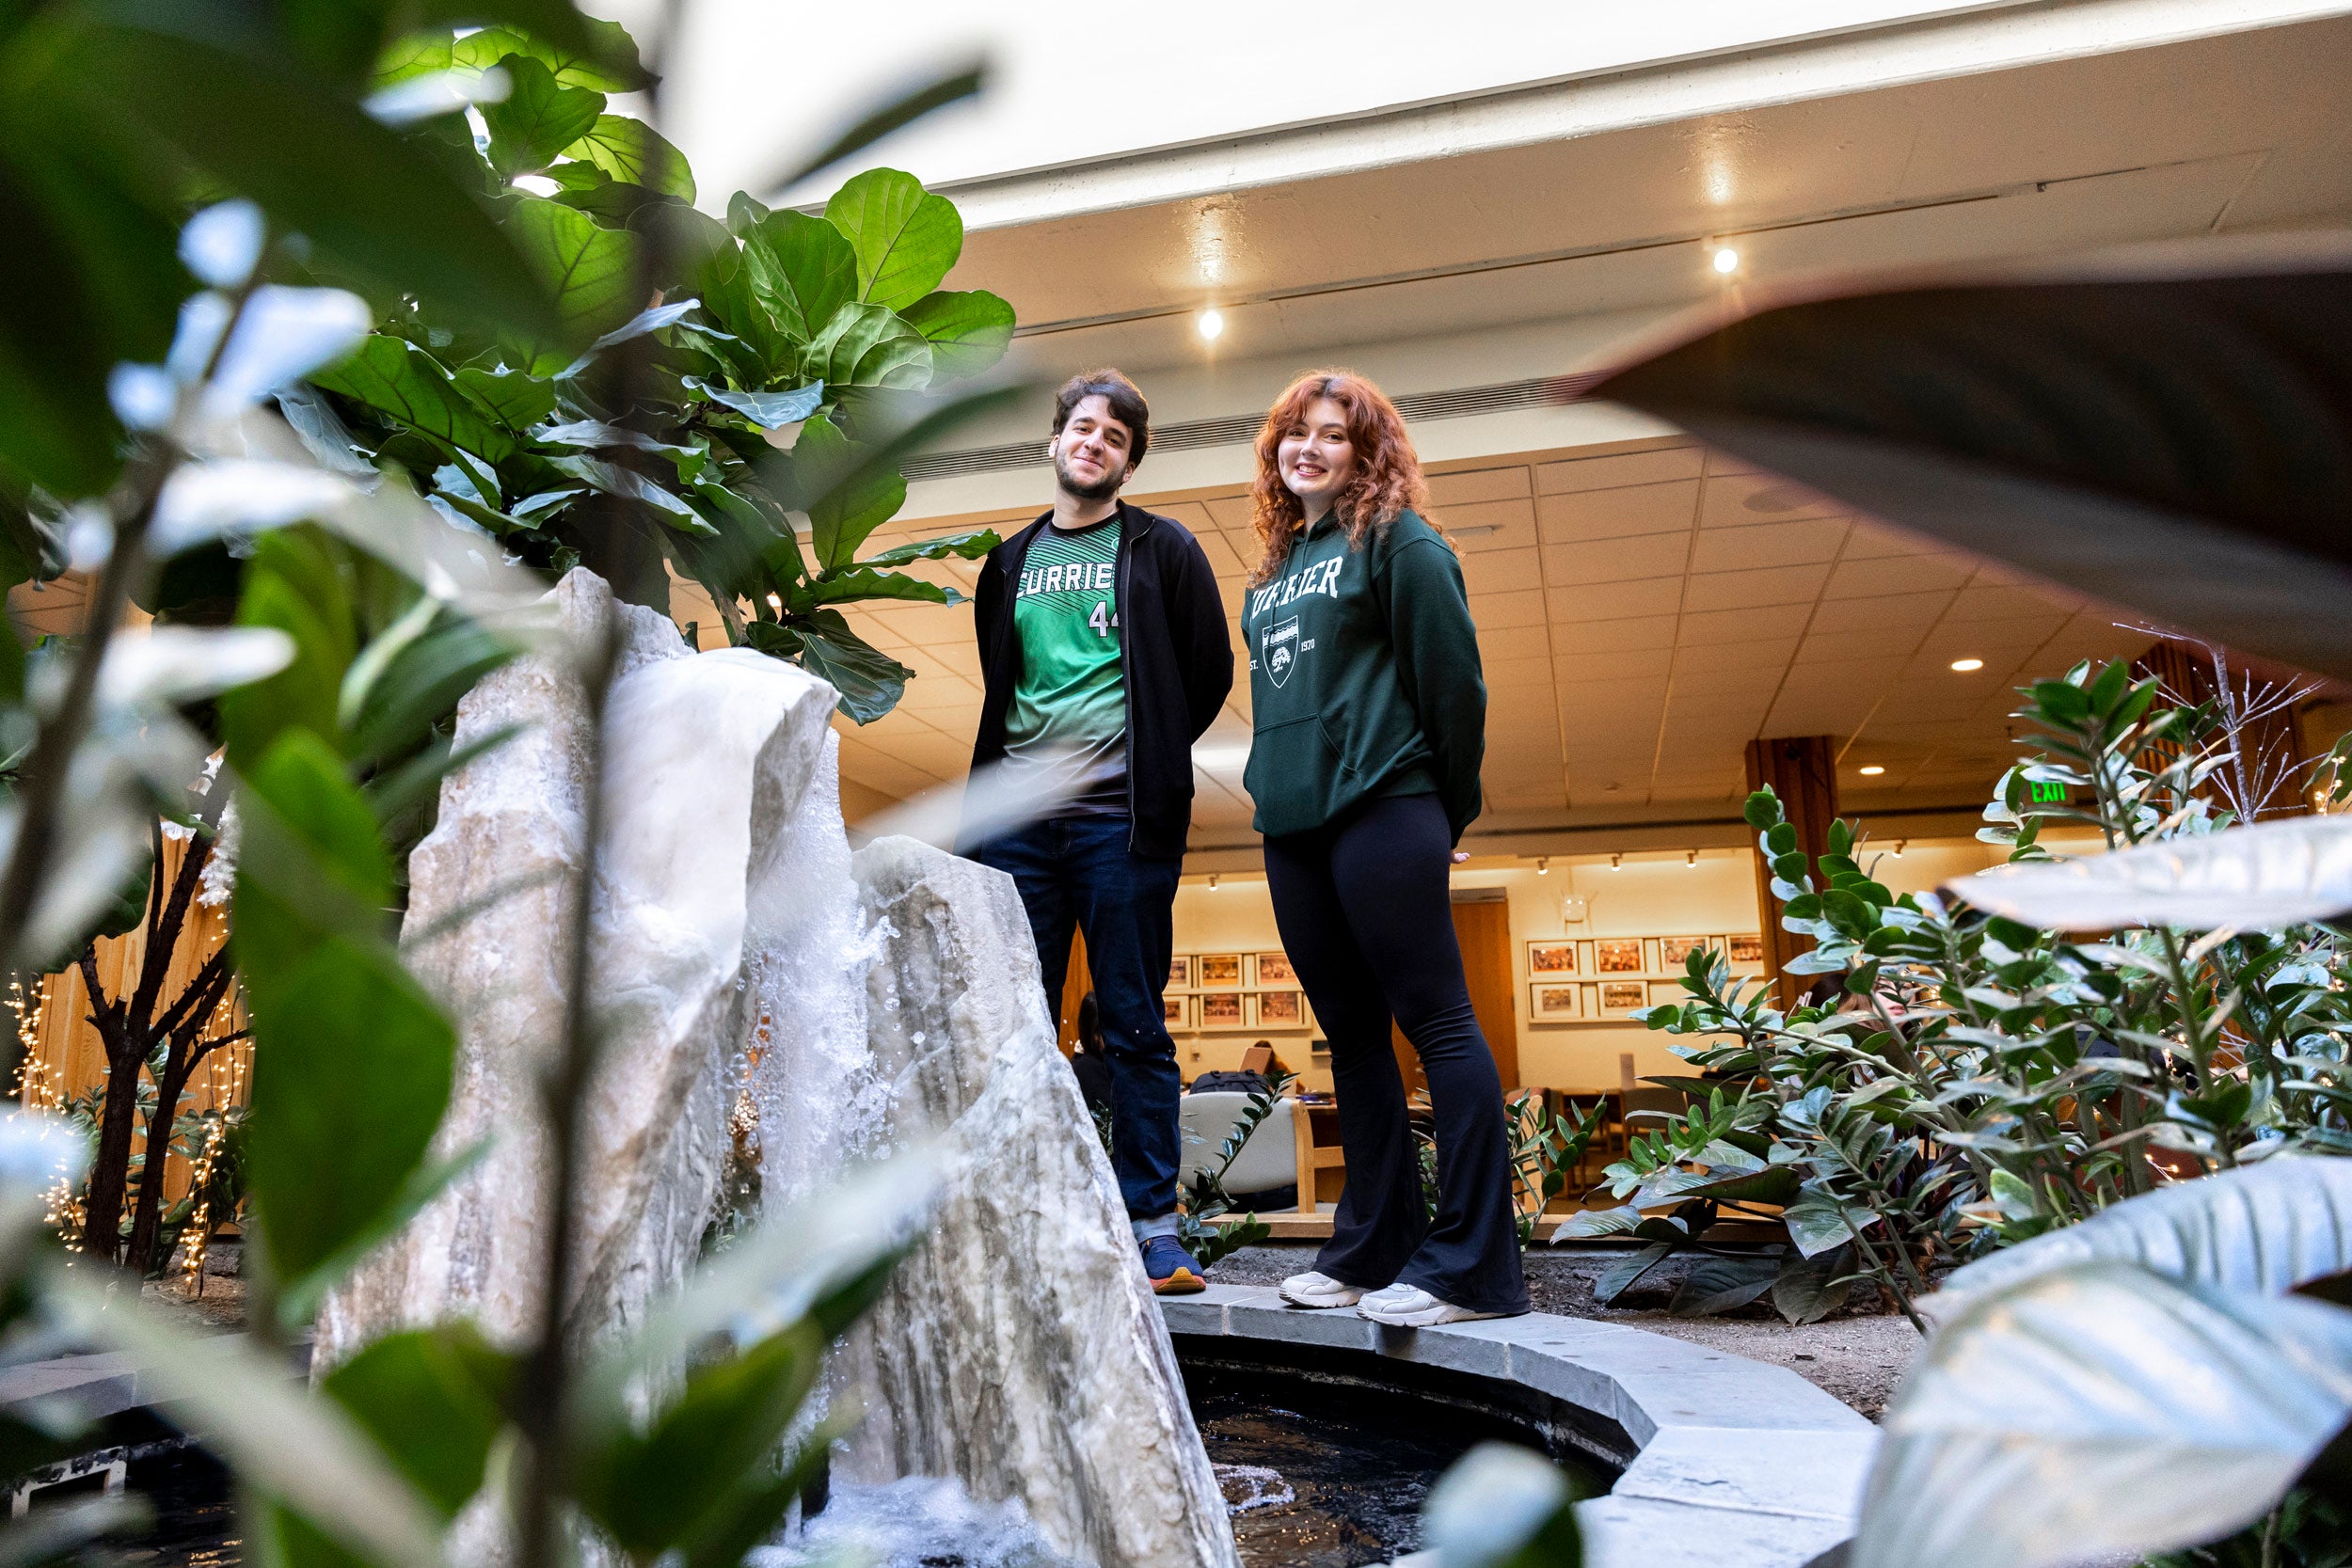 Necati Unsal (left) and Sam Vitale stand within the fountain and greenery in the middle of the Currier House dining hall.